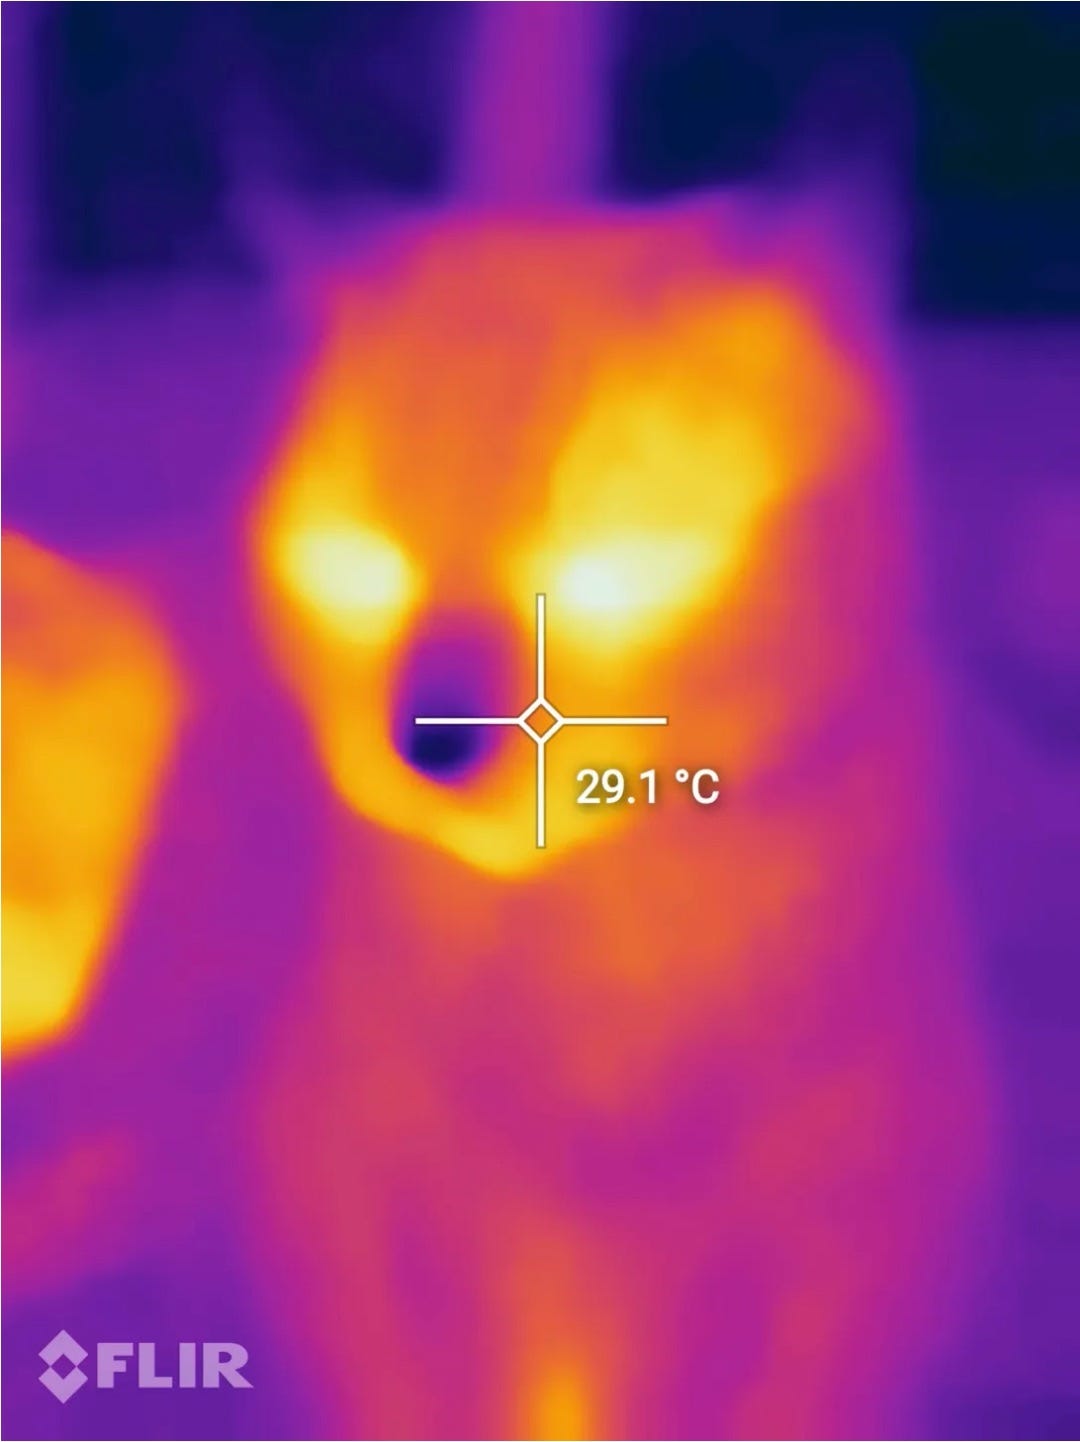 Thermal image of a cat